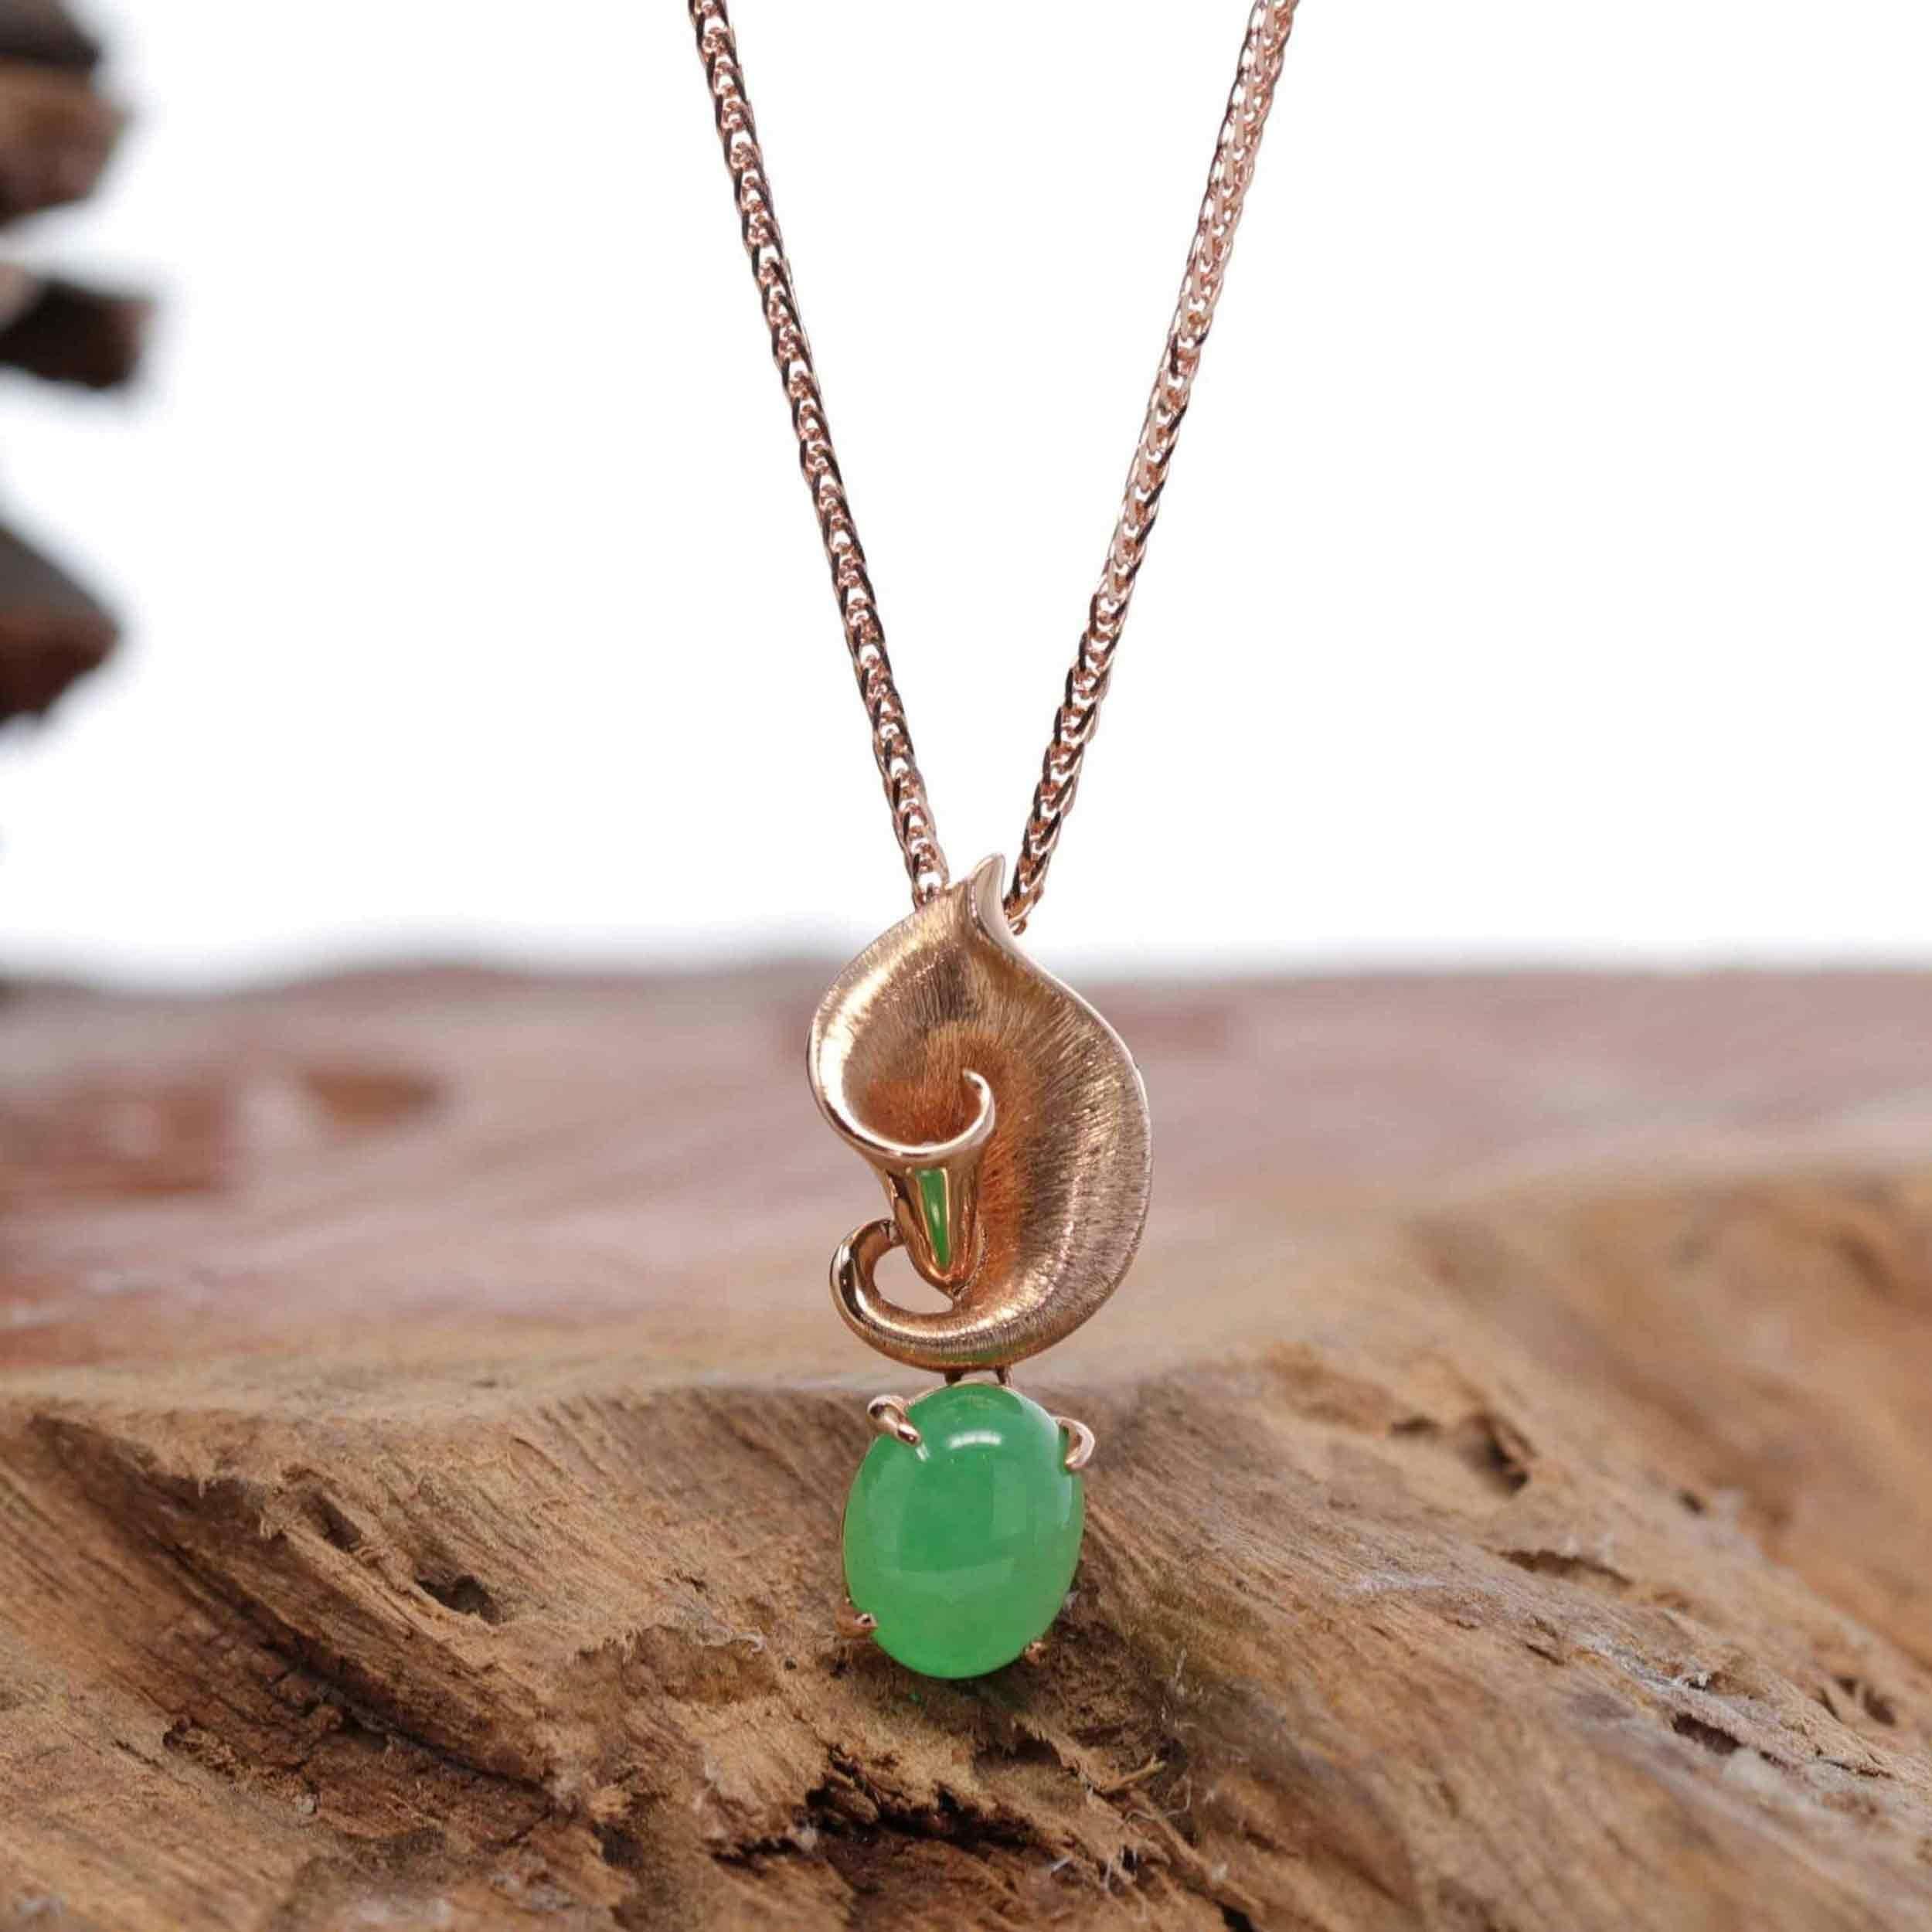 * DESIGN CONCEPT--- This necklace is made with oval genuine imperial green Burmese jadeite. The design was inspired by the morning glory flower. A modern spin on mother nature's motif. Representing wholeness, completeness, and contentment. 
  

*